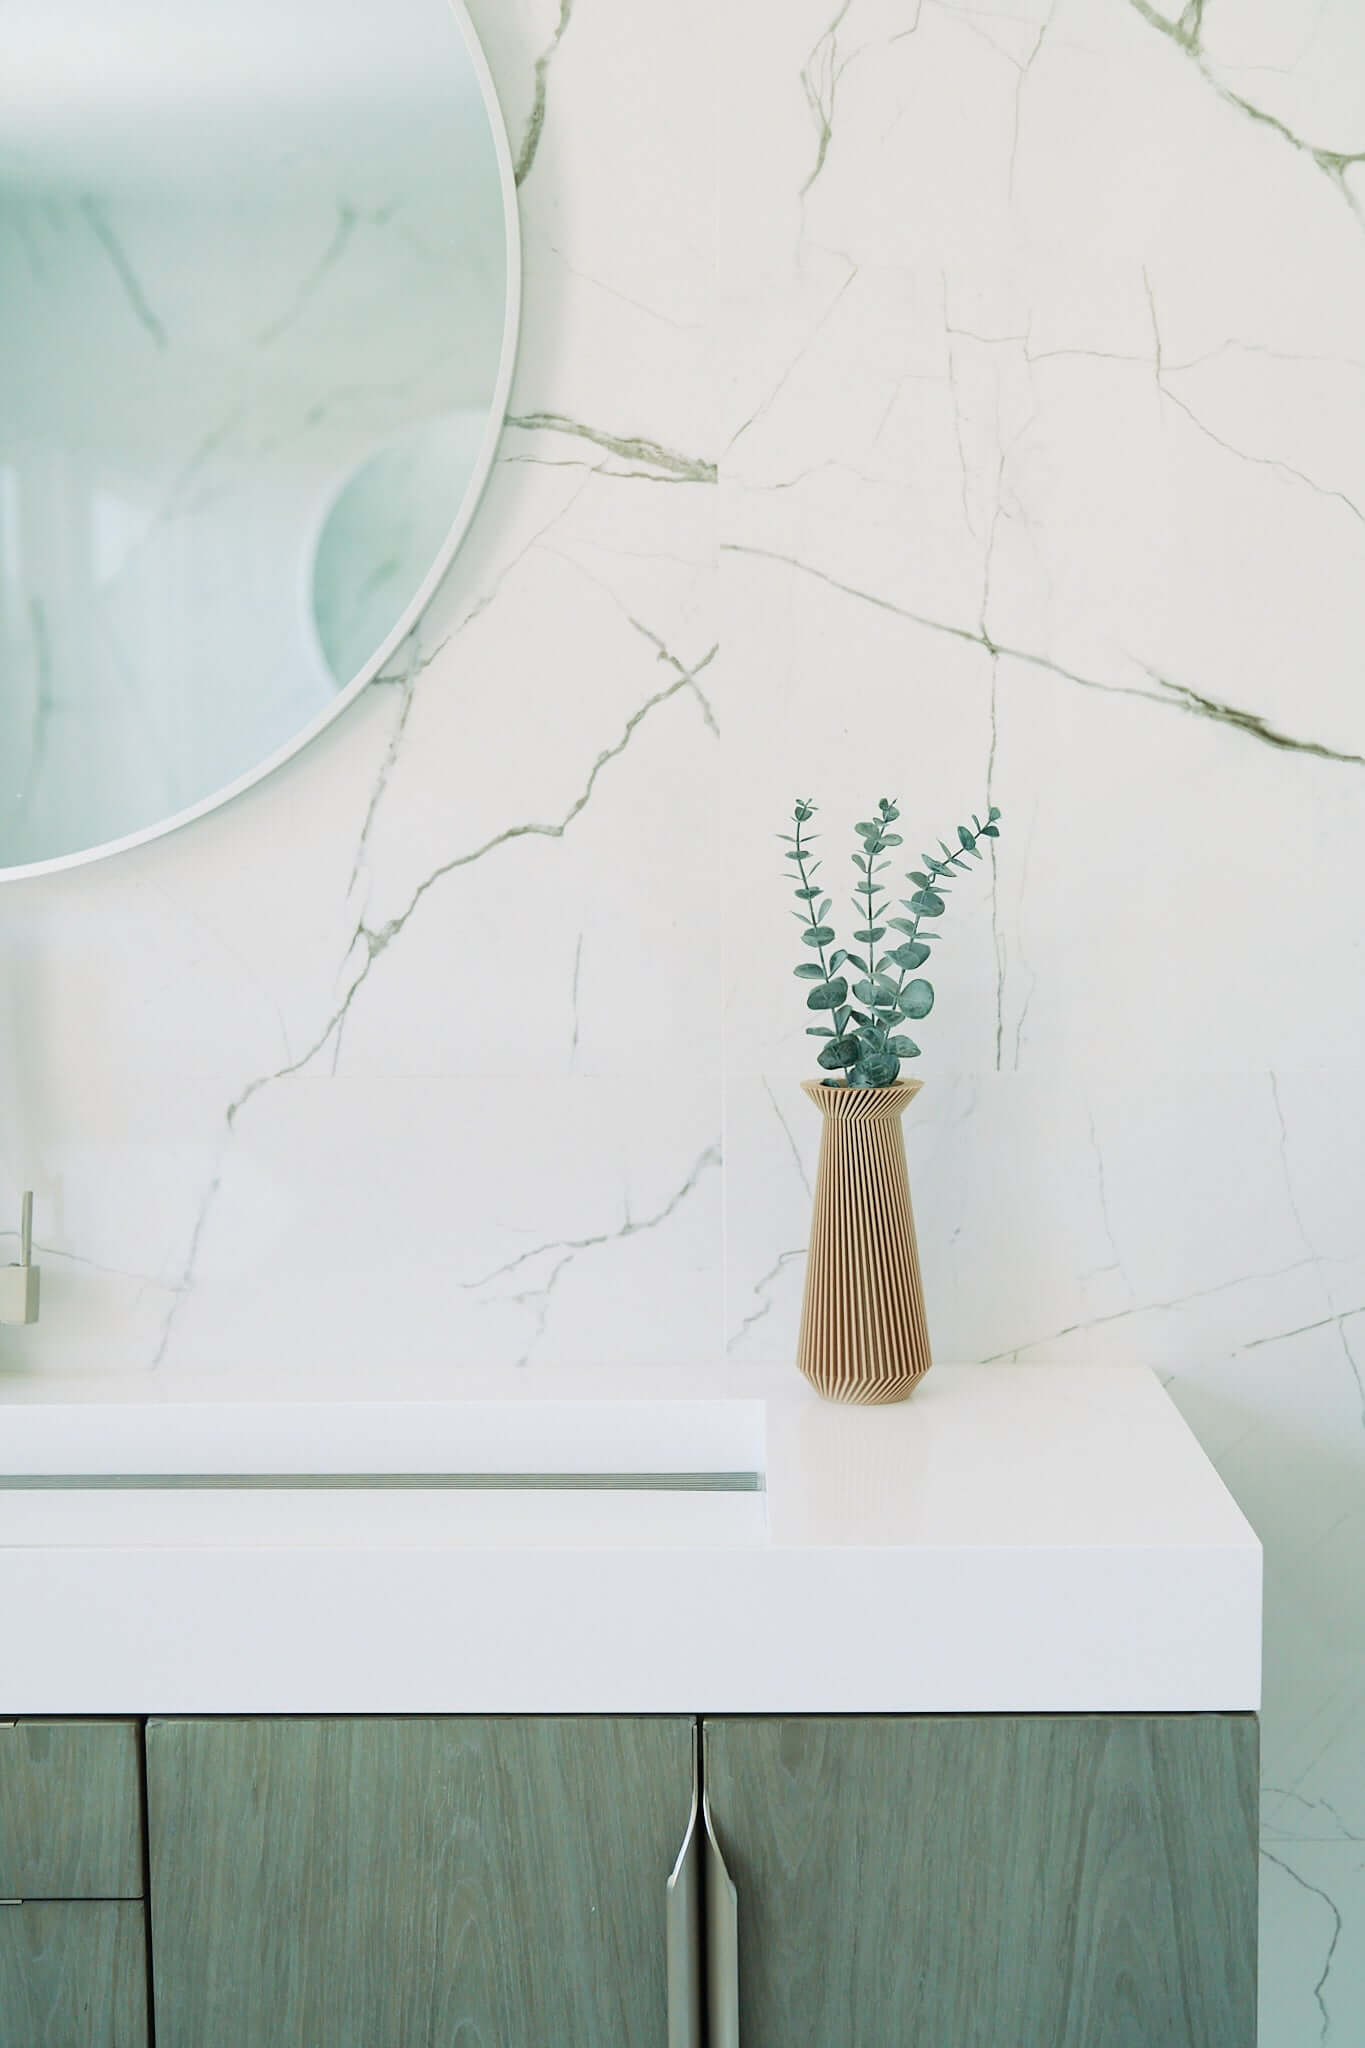 A boho vase / beige vase with eucalyptus on a marble bathroom sink countertop. This is from unique vases of Woodland Pulse.